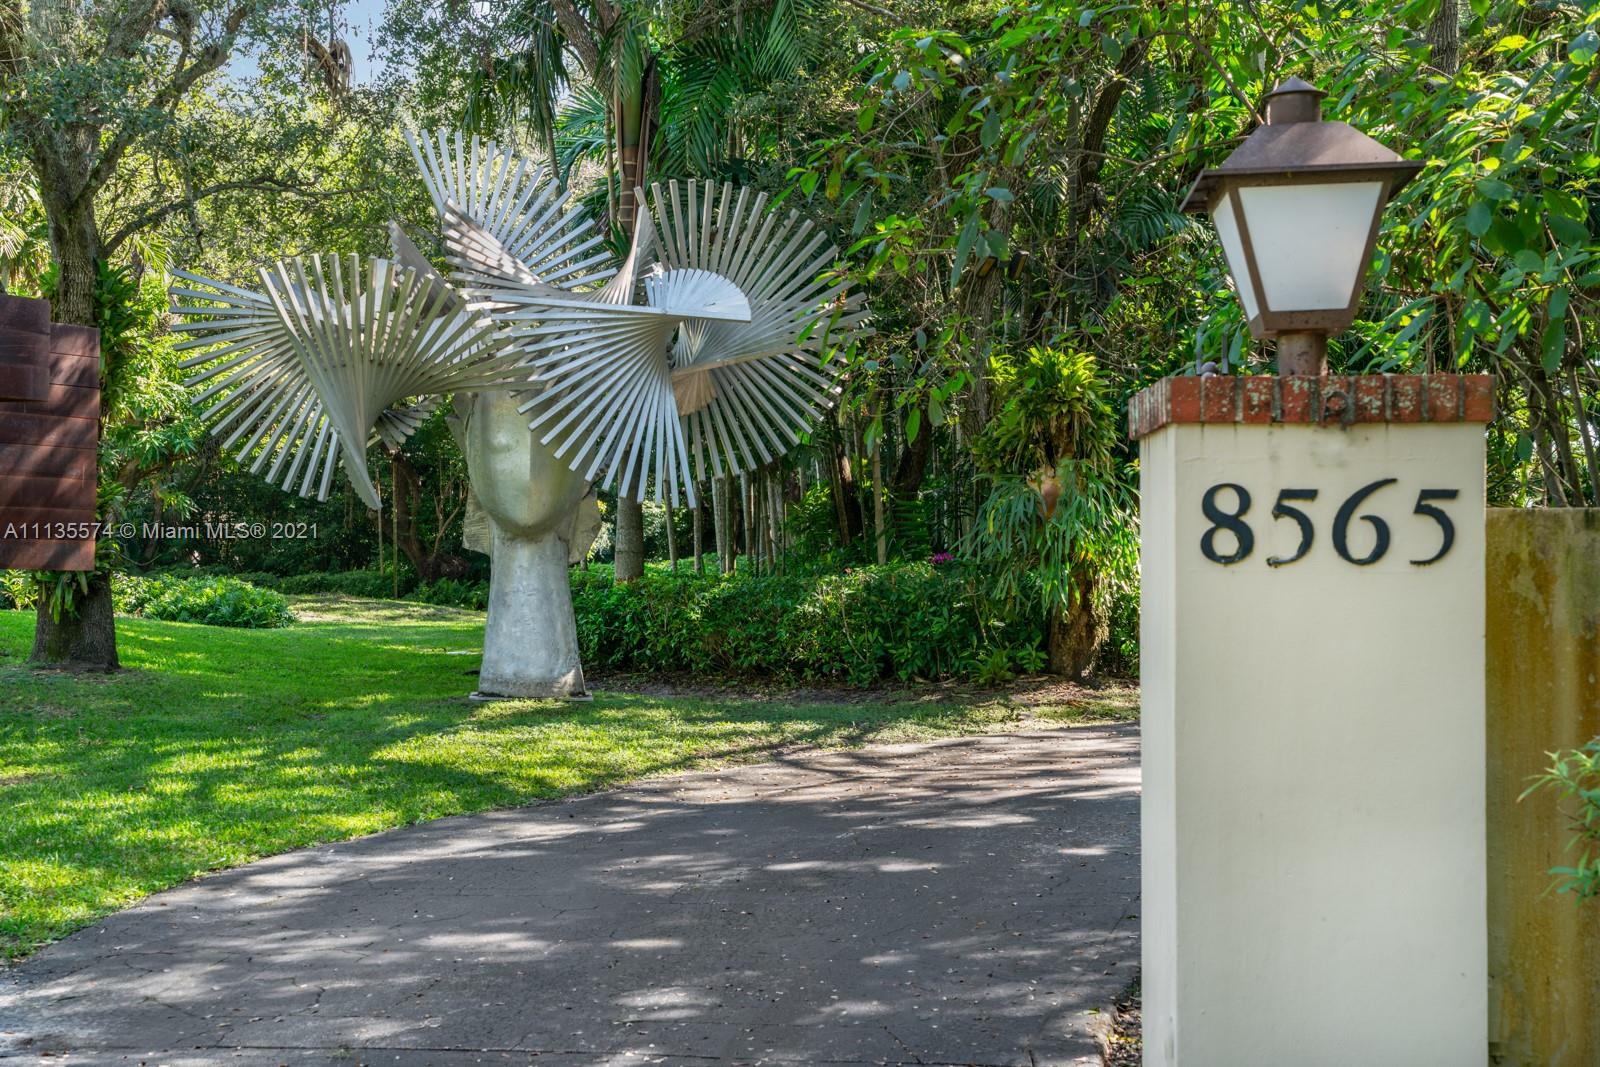 A once in a lifetime opportunity to own the 2nd largest parcel in all of Gables Estates. Build the home of your dreams on this stunning, tree lined, 4.6 acre estate with 302 feet of water frontage and no bridges to bay. The 7 bedroom, 6 bathroom main residence plus 1 bed / 1 bath guest house, comprising a total living area of 9,176 square feet is perfectly located in the heart of Coral Gables. When you want privacy, location, security and space and ... when only the best will do.